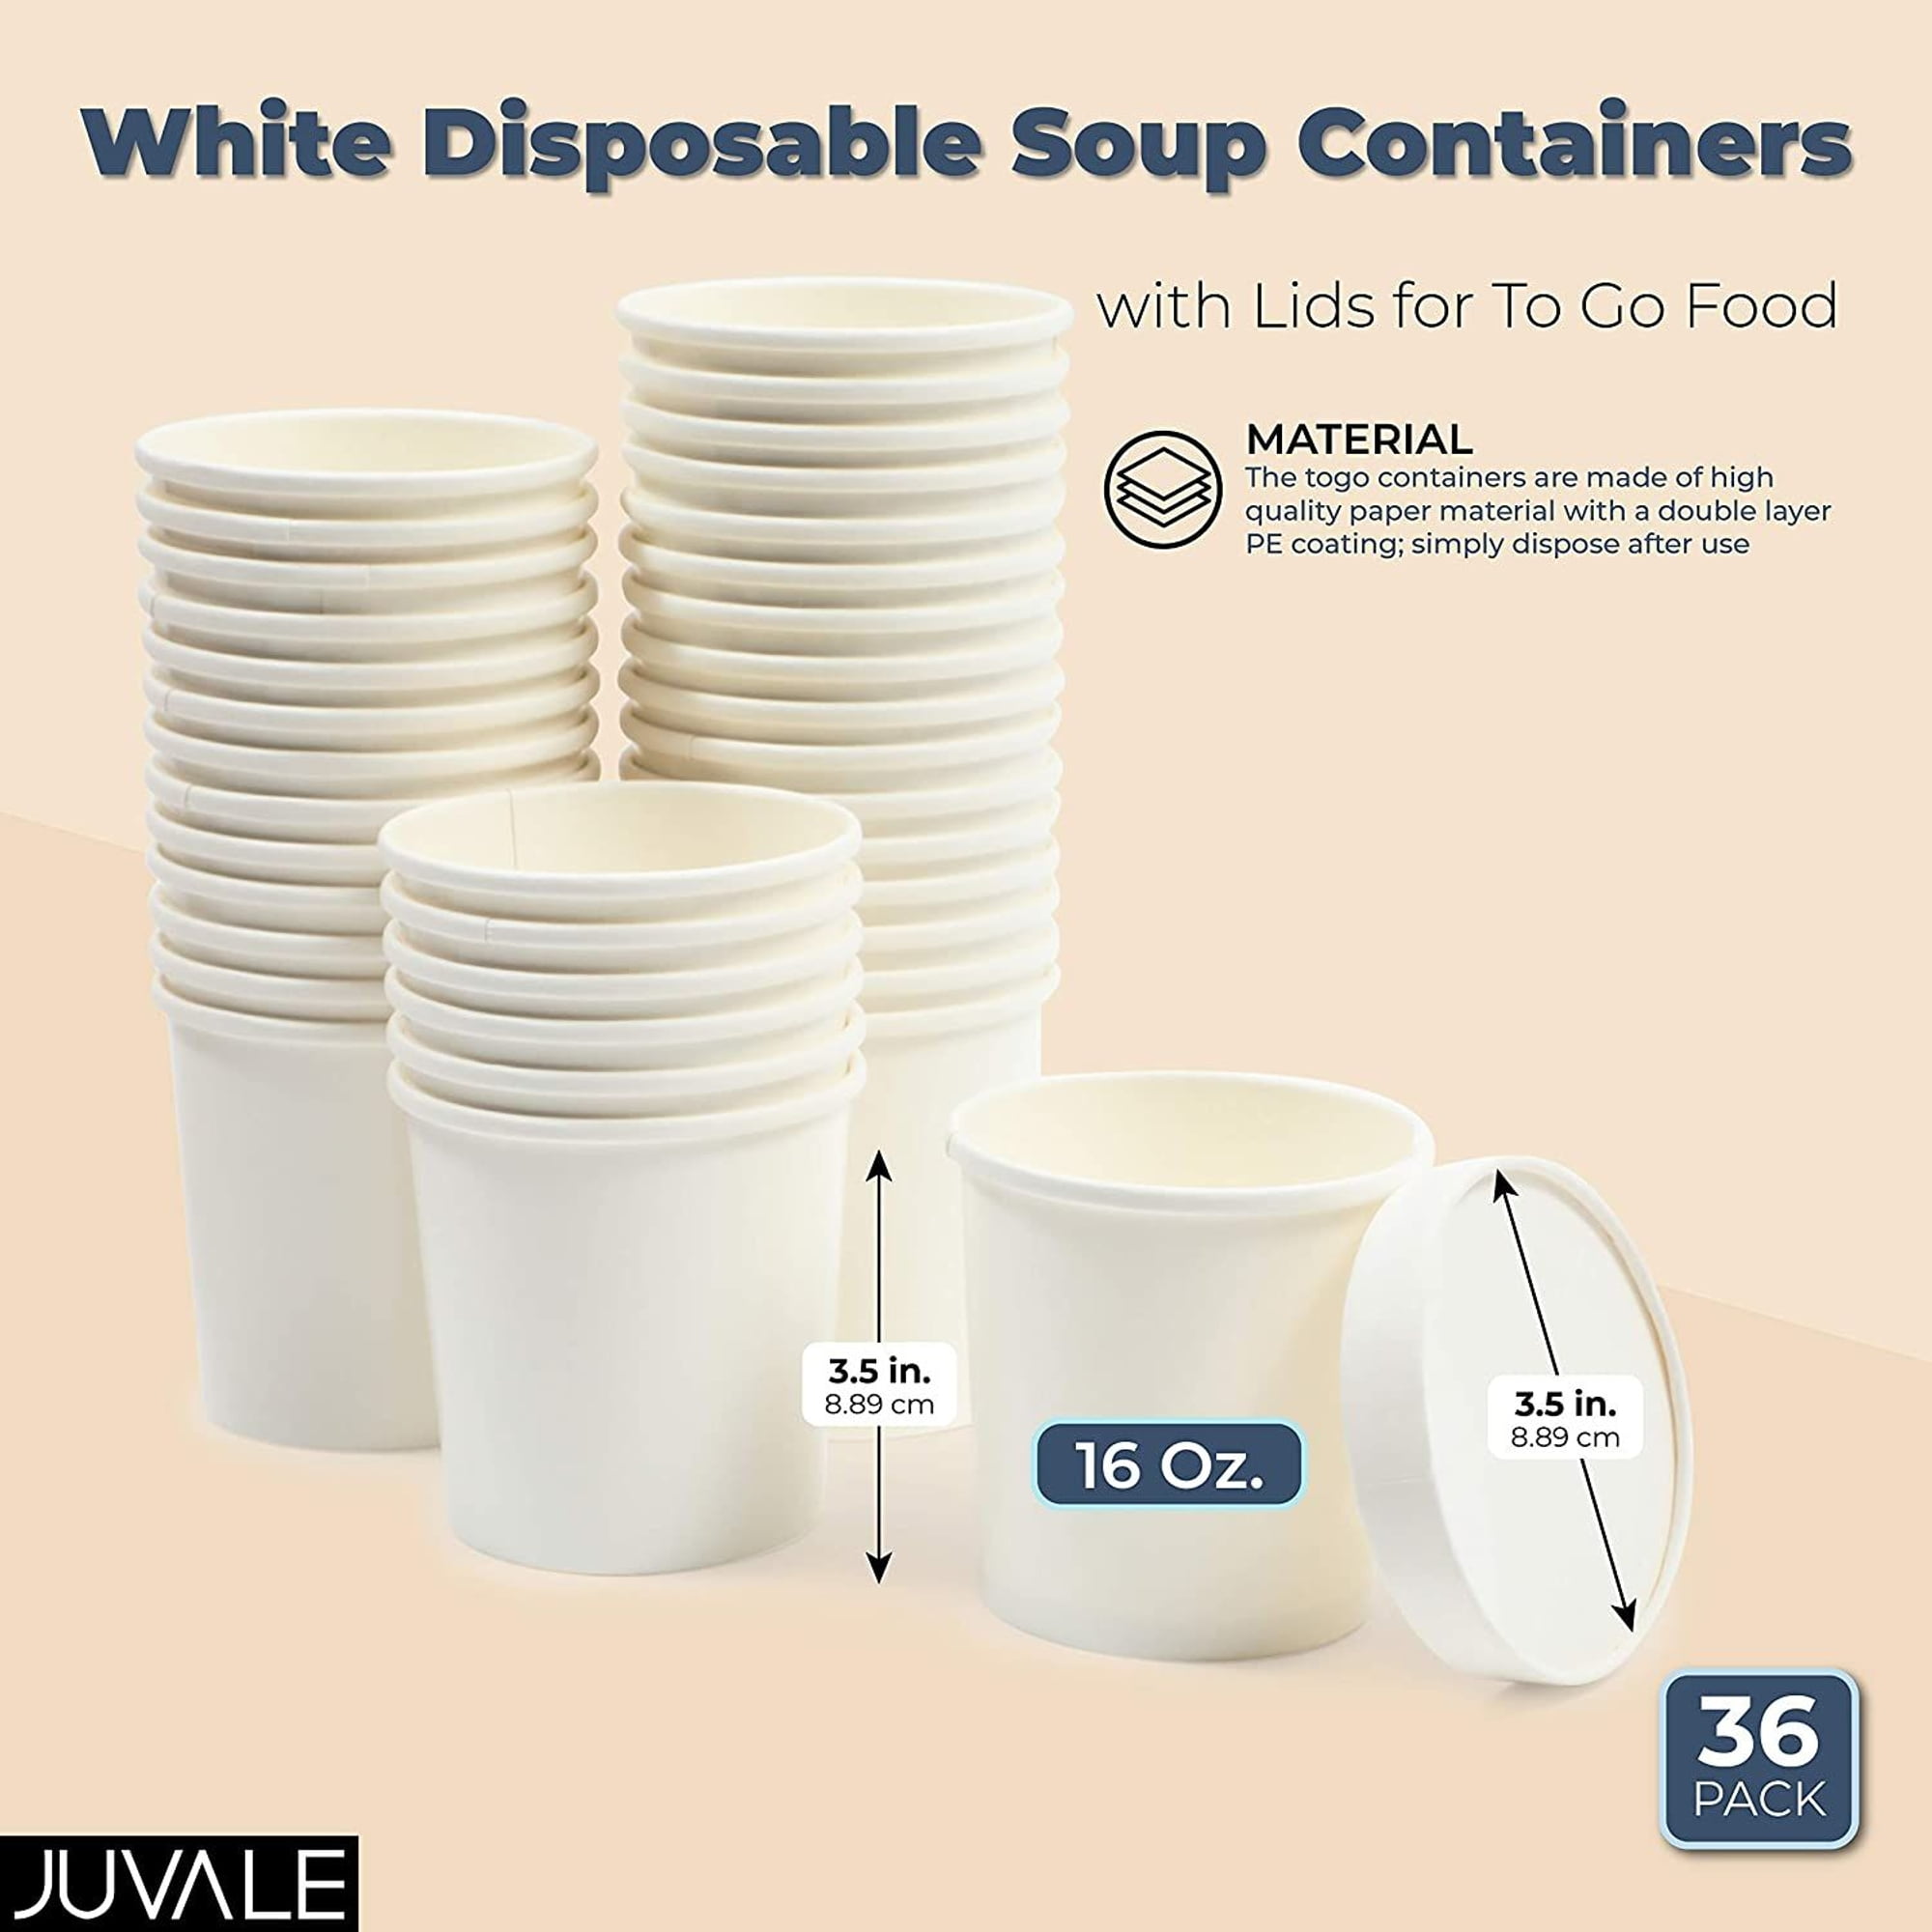 Asporto 16 Ounce to Go Boxes, 100 Microwavable Round Soup Containers - Clear Plastic Lids Included, Do Not Contain BPA, White Plastic Catering Food Co